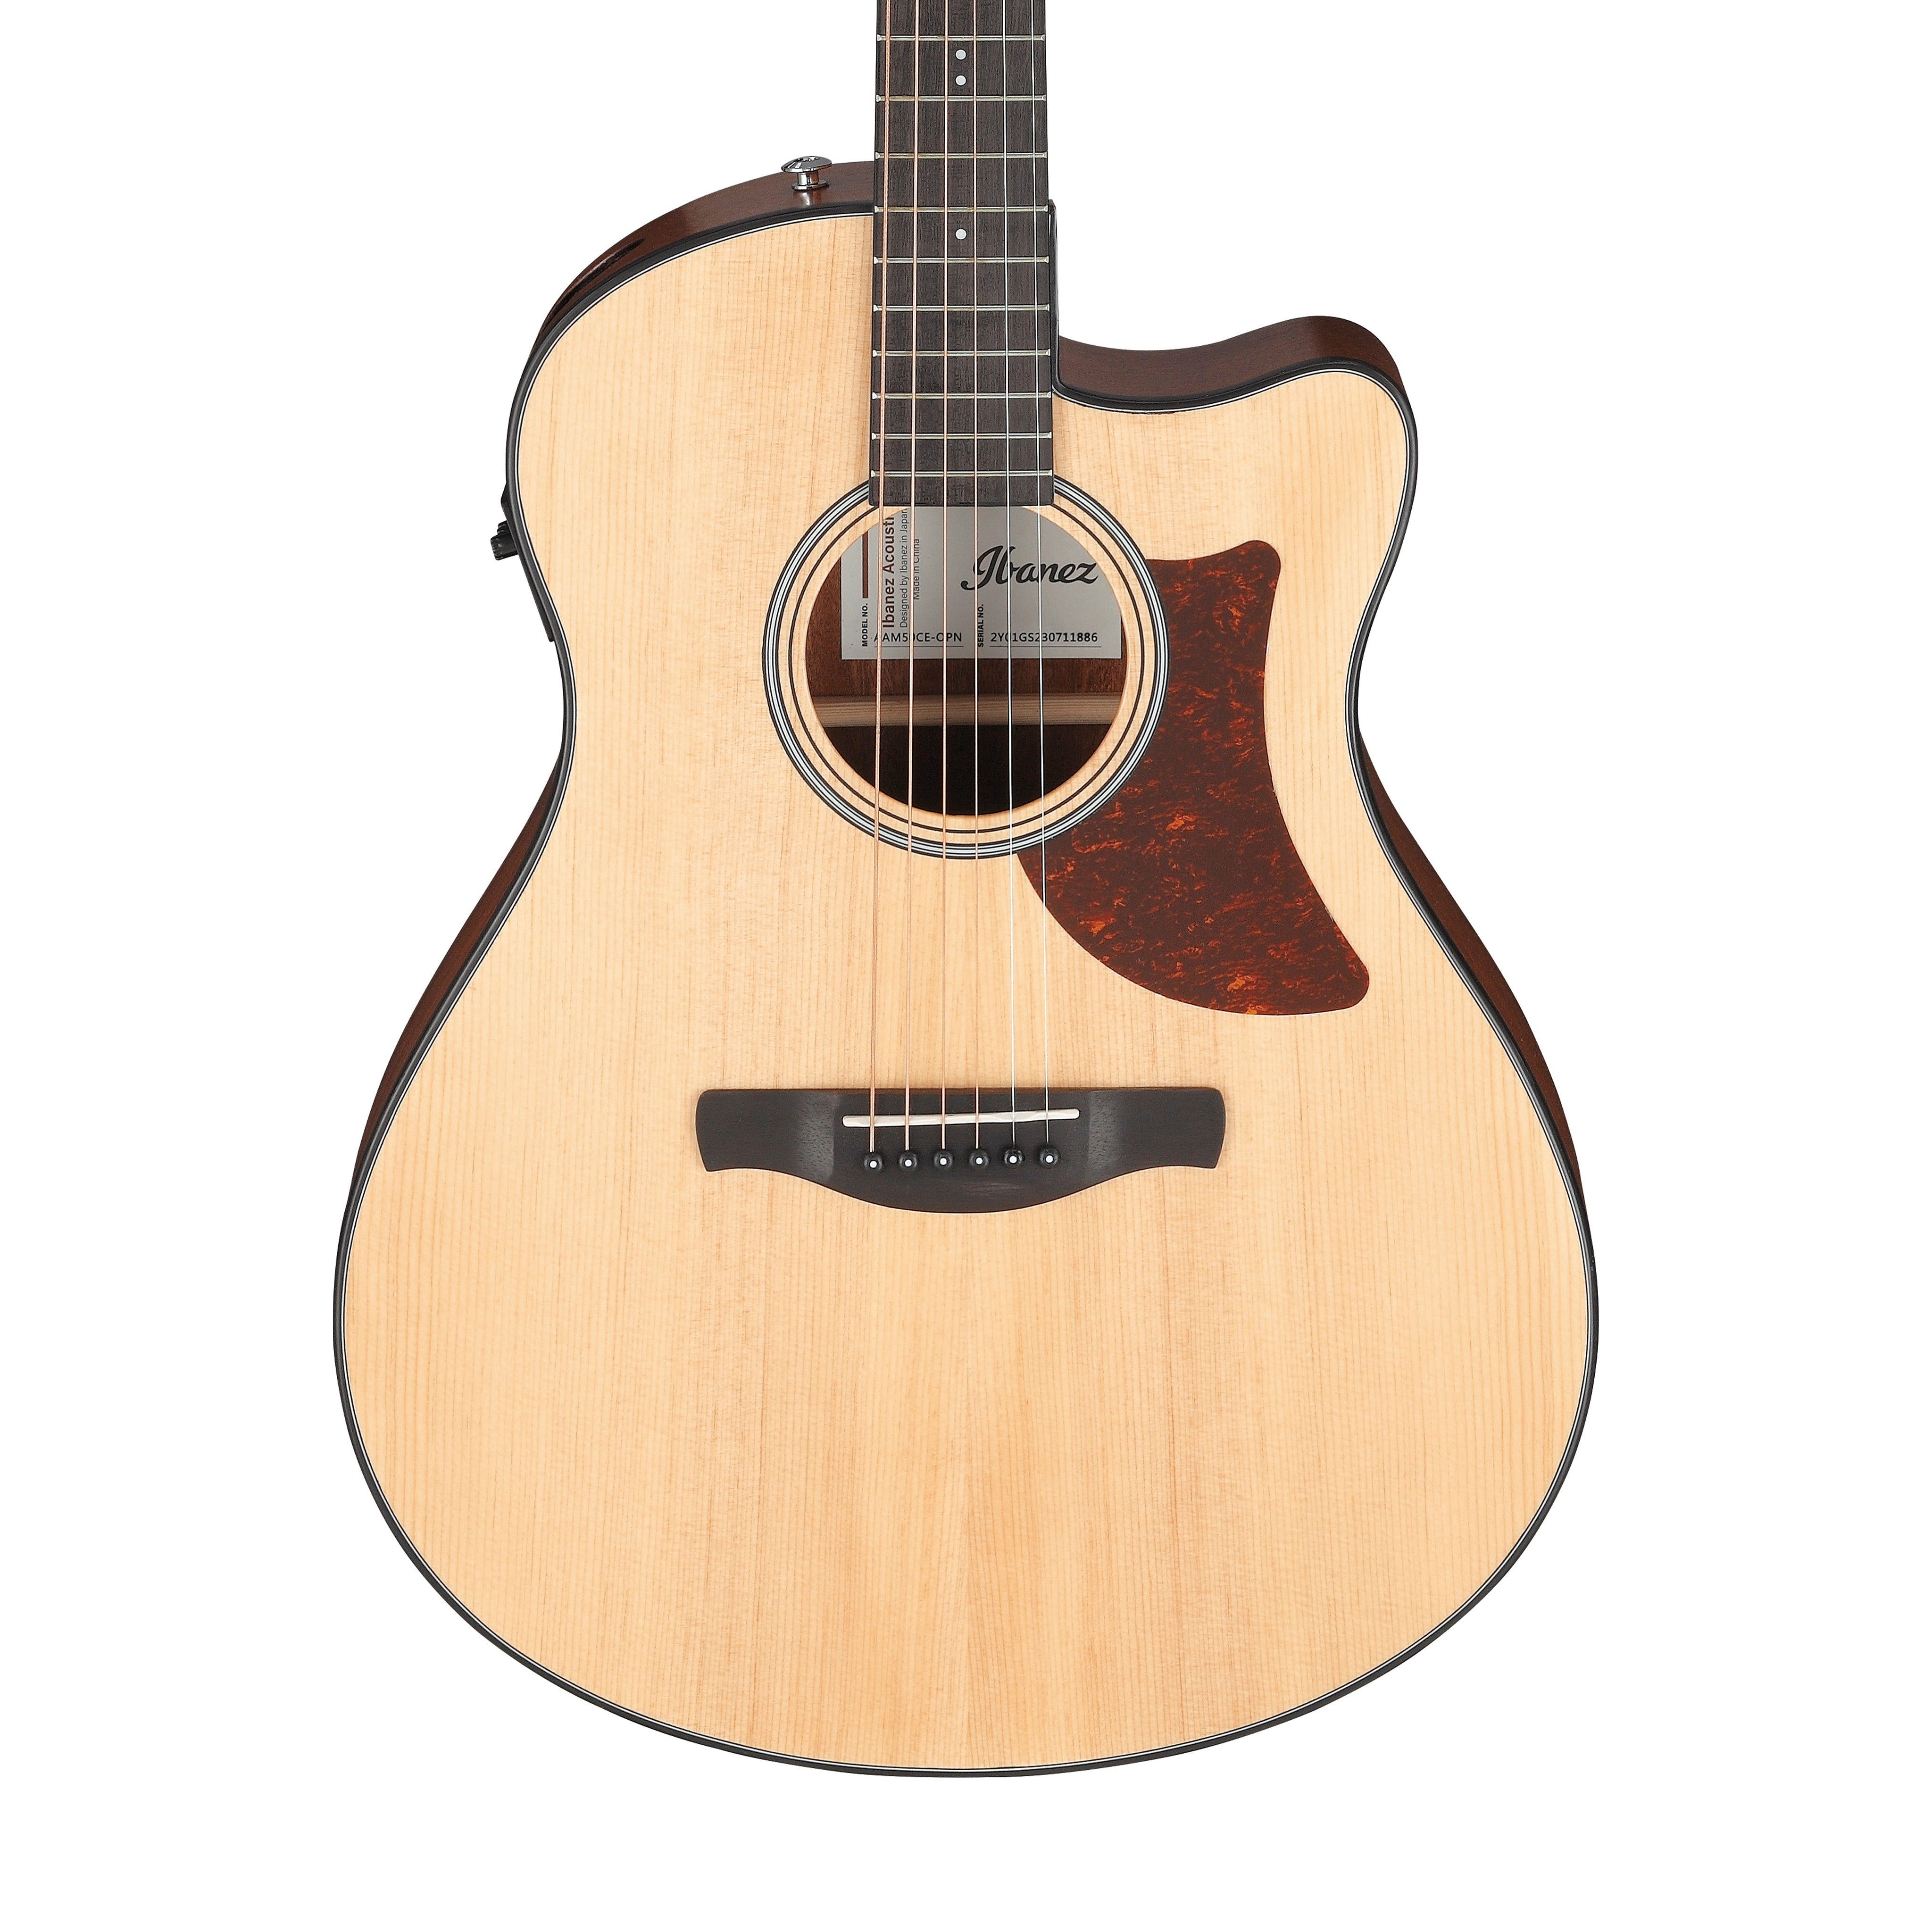 Ibanez AAM50CE Advanced Acoustic Auditorium Acoustic-electric Guitar - Natural | Zoso Music Sdn Bhd